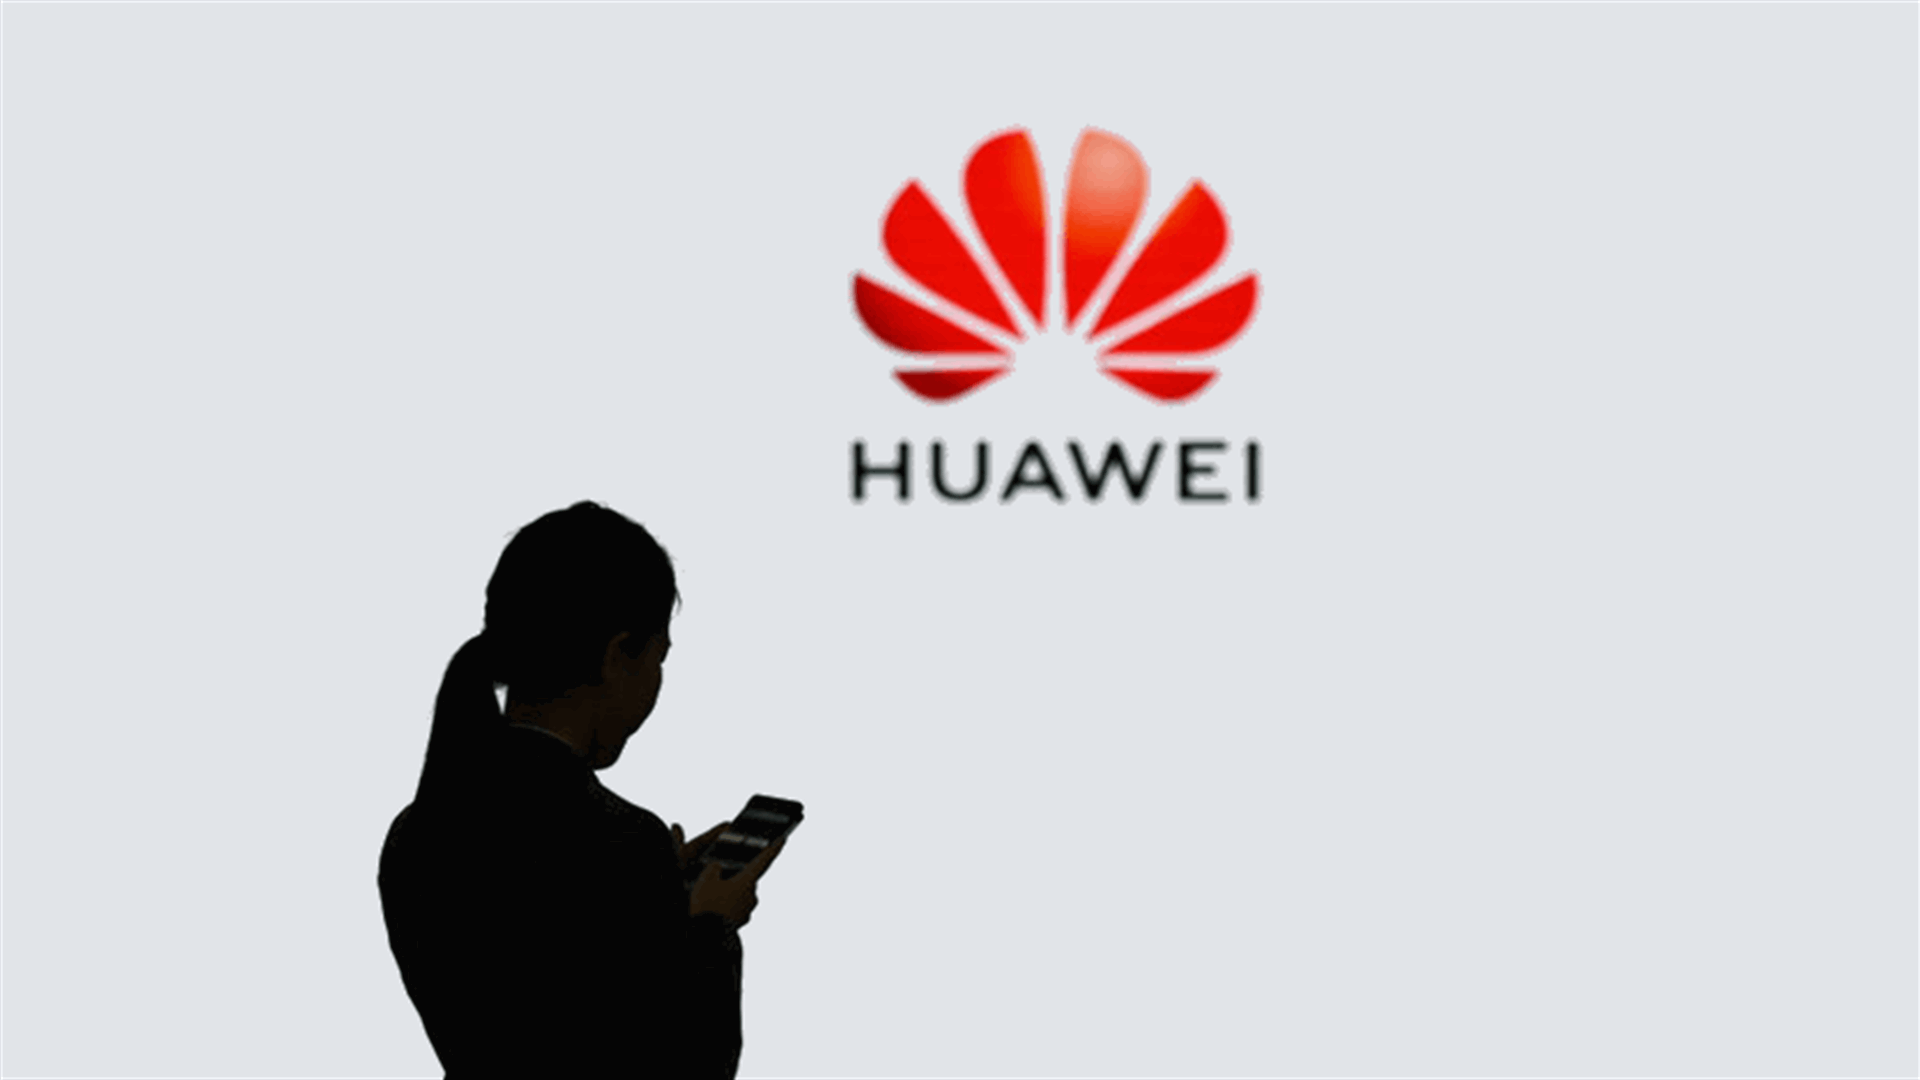 Huawei responds to news saying Google suspending some business with it